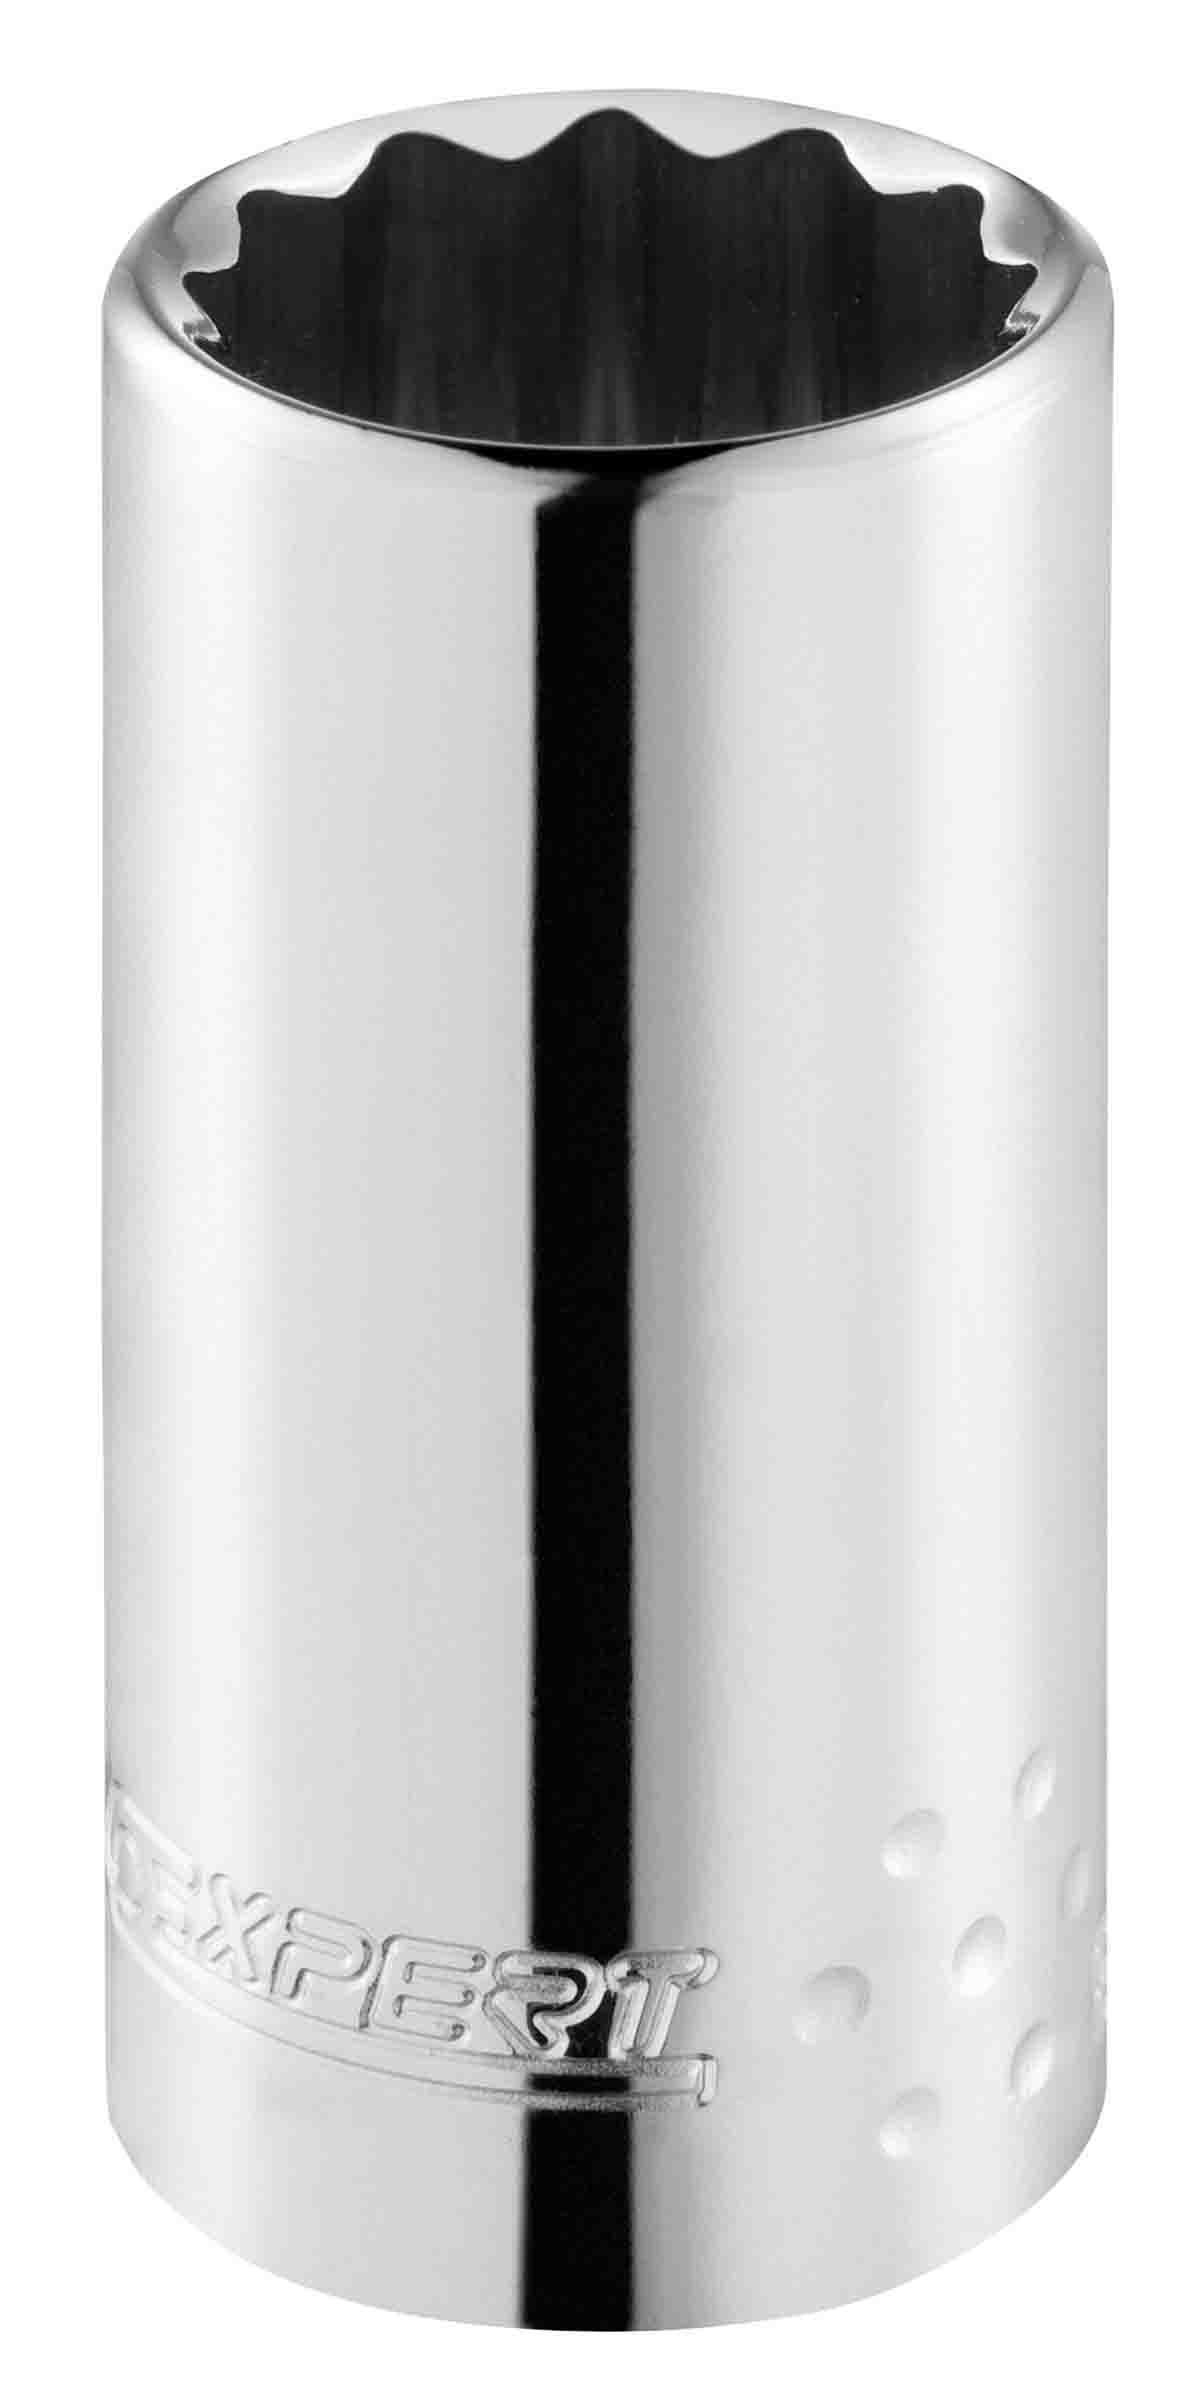 Expert by Facom 19mm Bi-Hex Socket With 1/2 in Drive , Length 79 mm